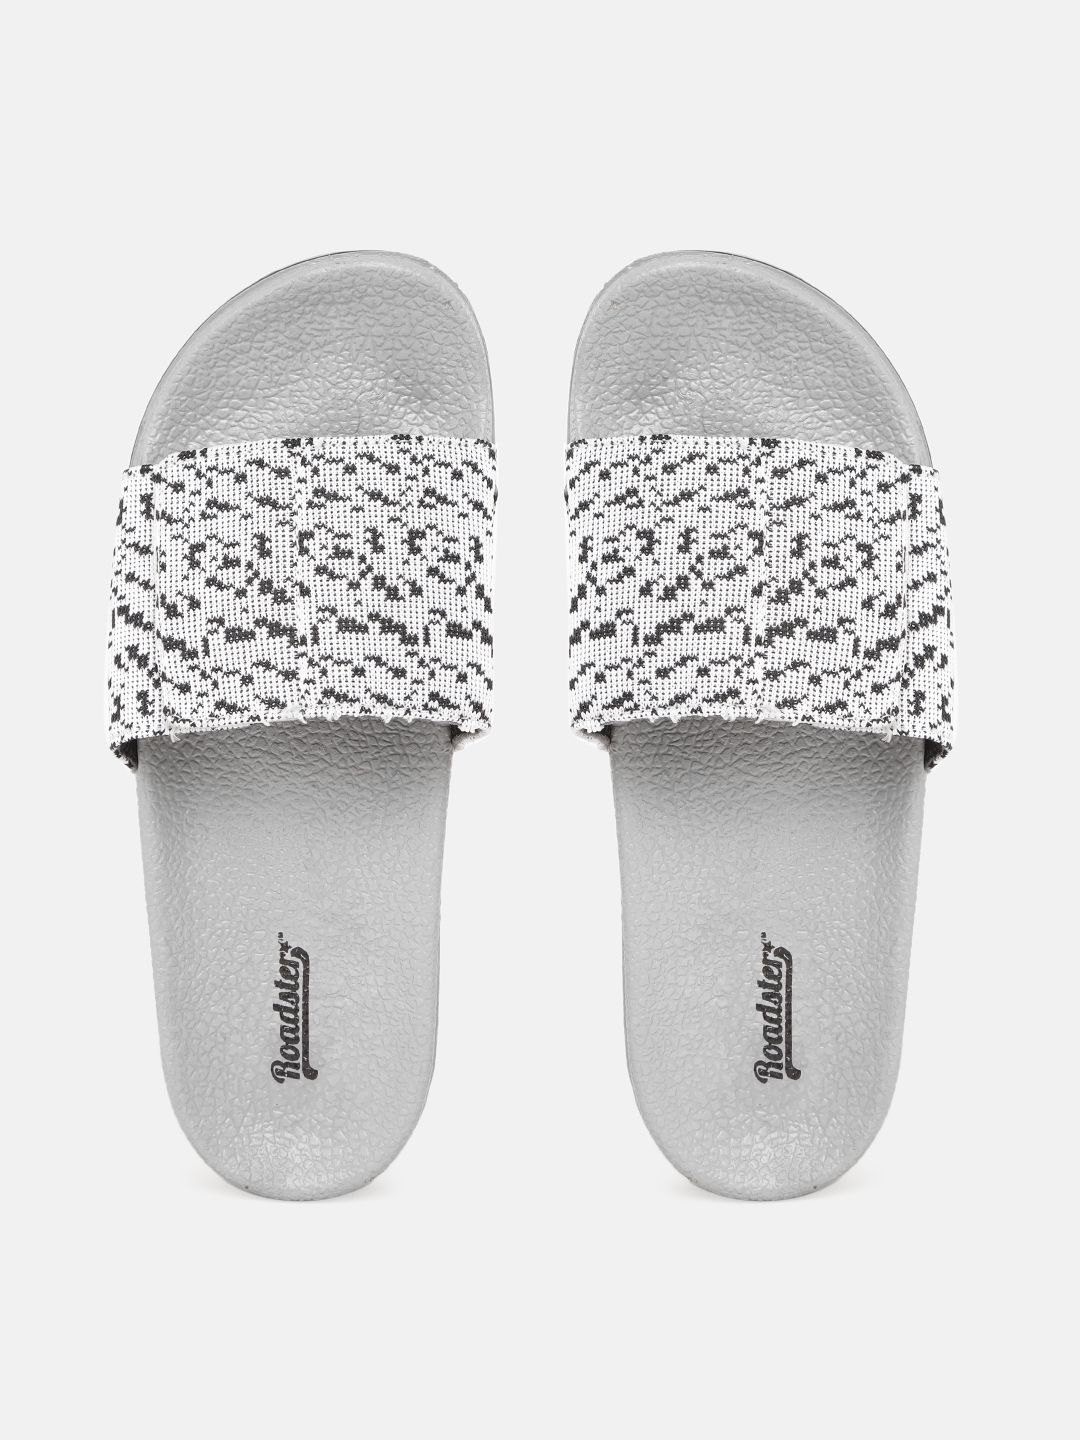 Roadster Women White & Black Abstract Self-Design Sliders with Velcro Price in India